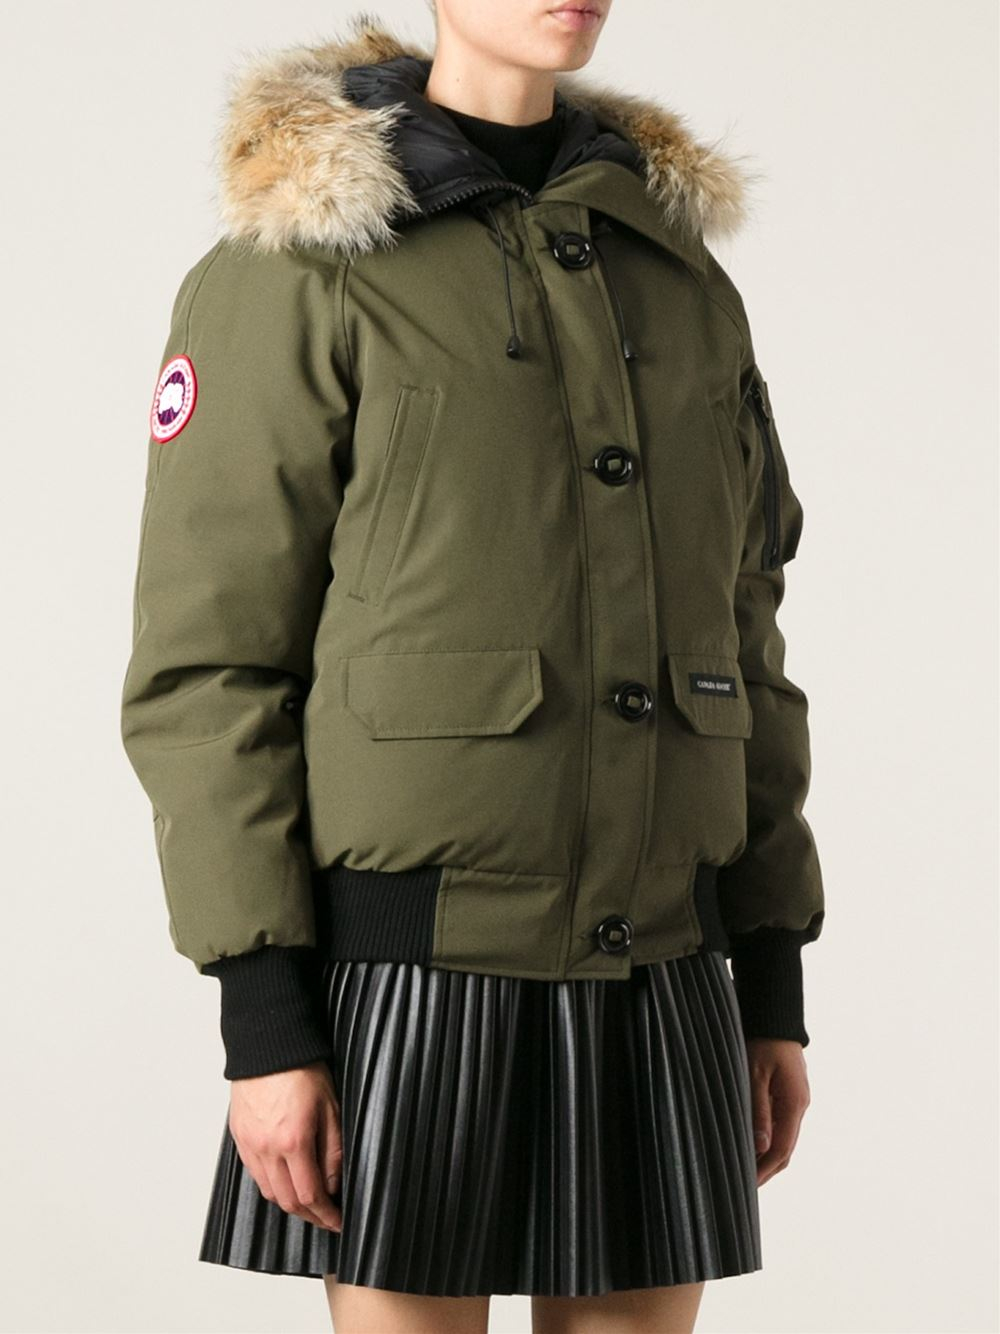 Lyst - Canada goose Blue Chilliwack Coyote Fur Trimmed Jacket in Green